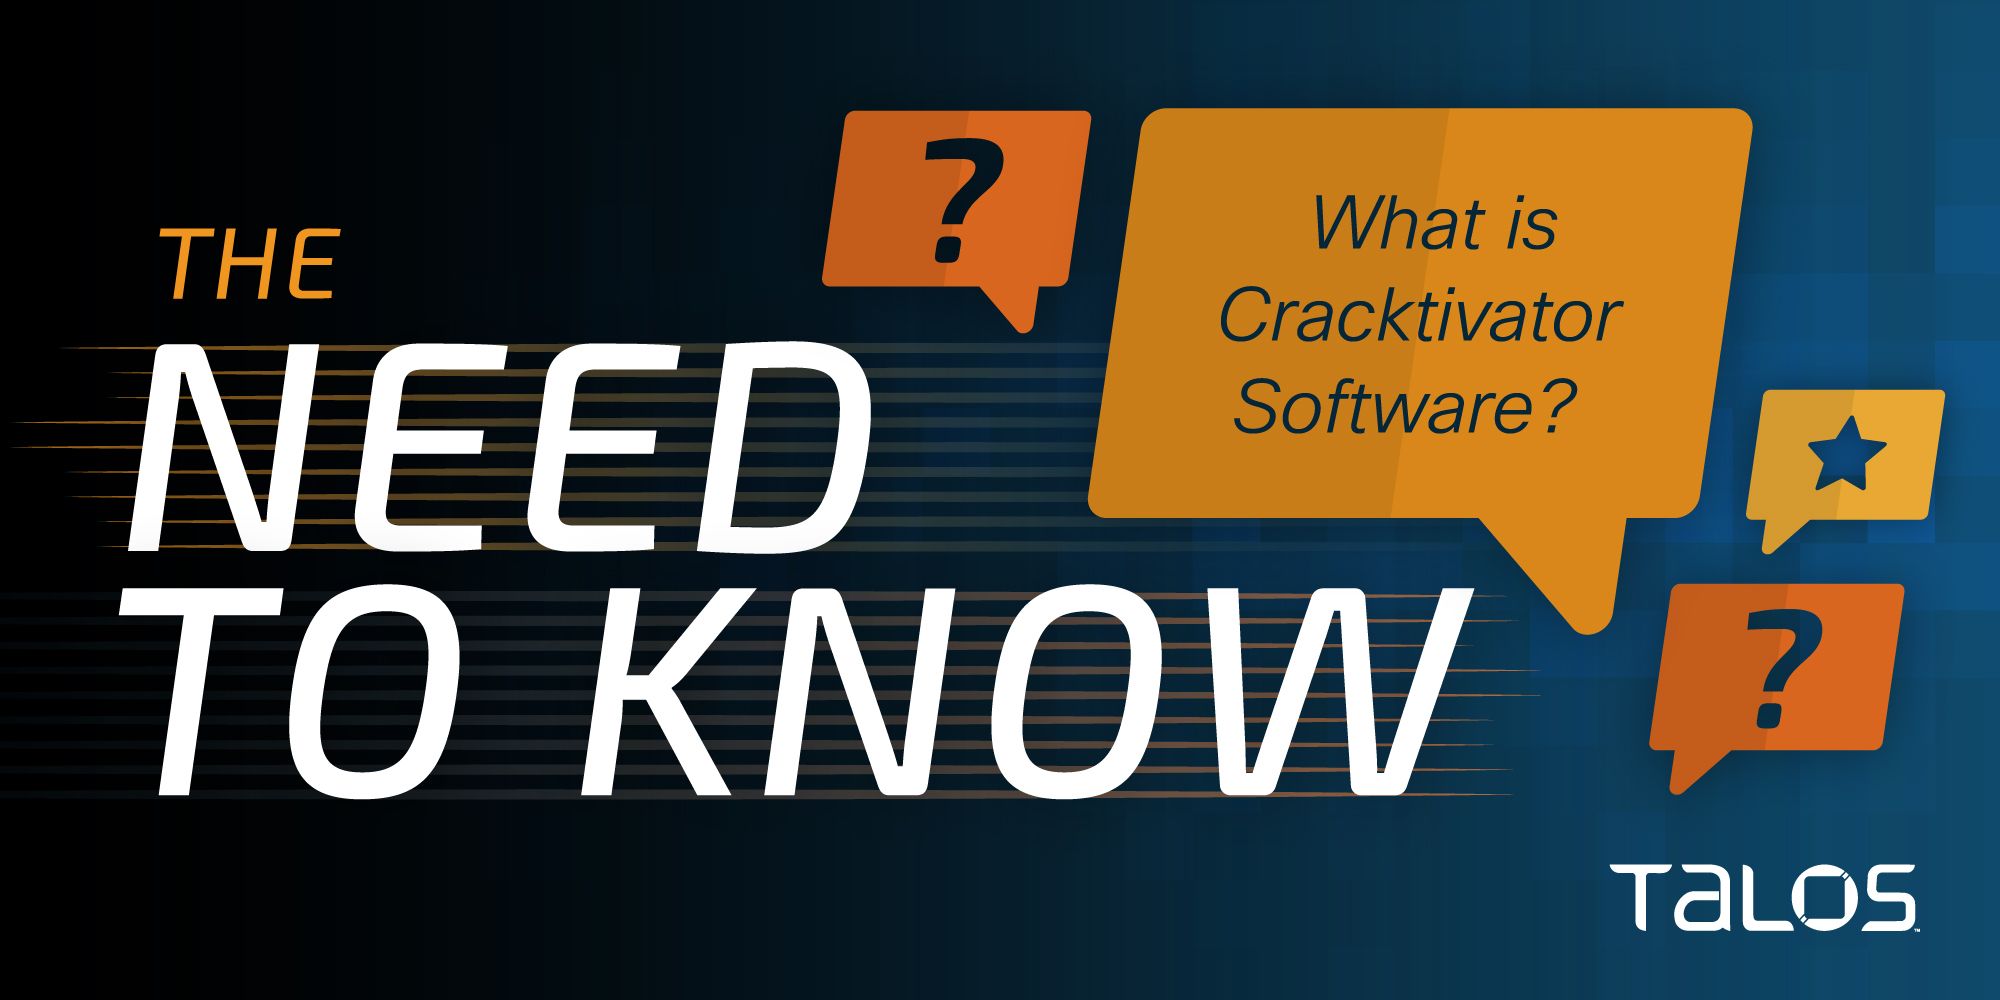 What is Cracktivator software?